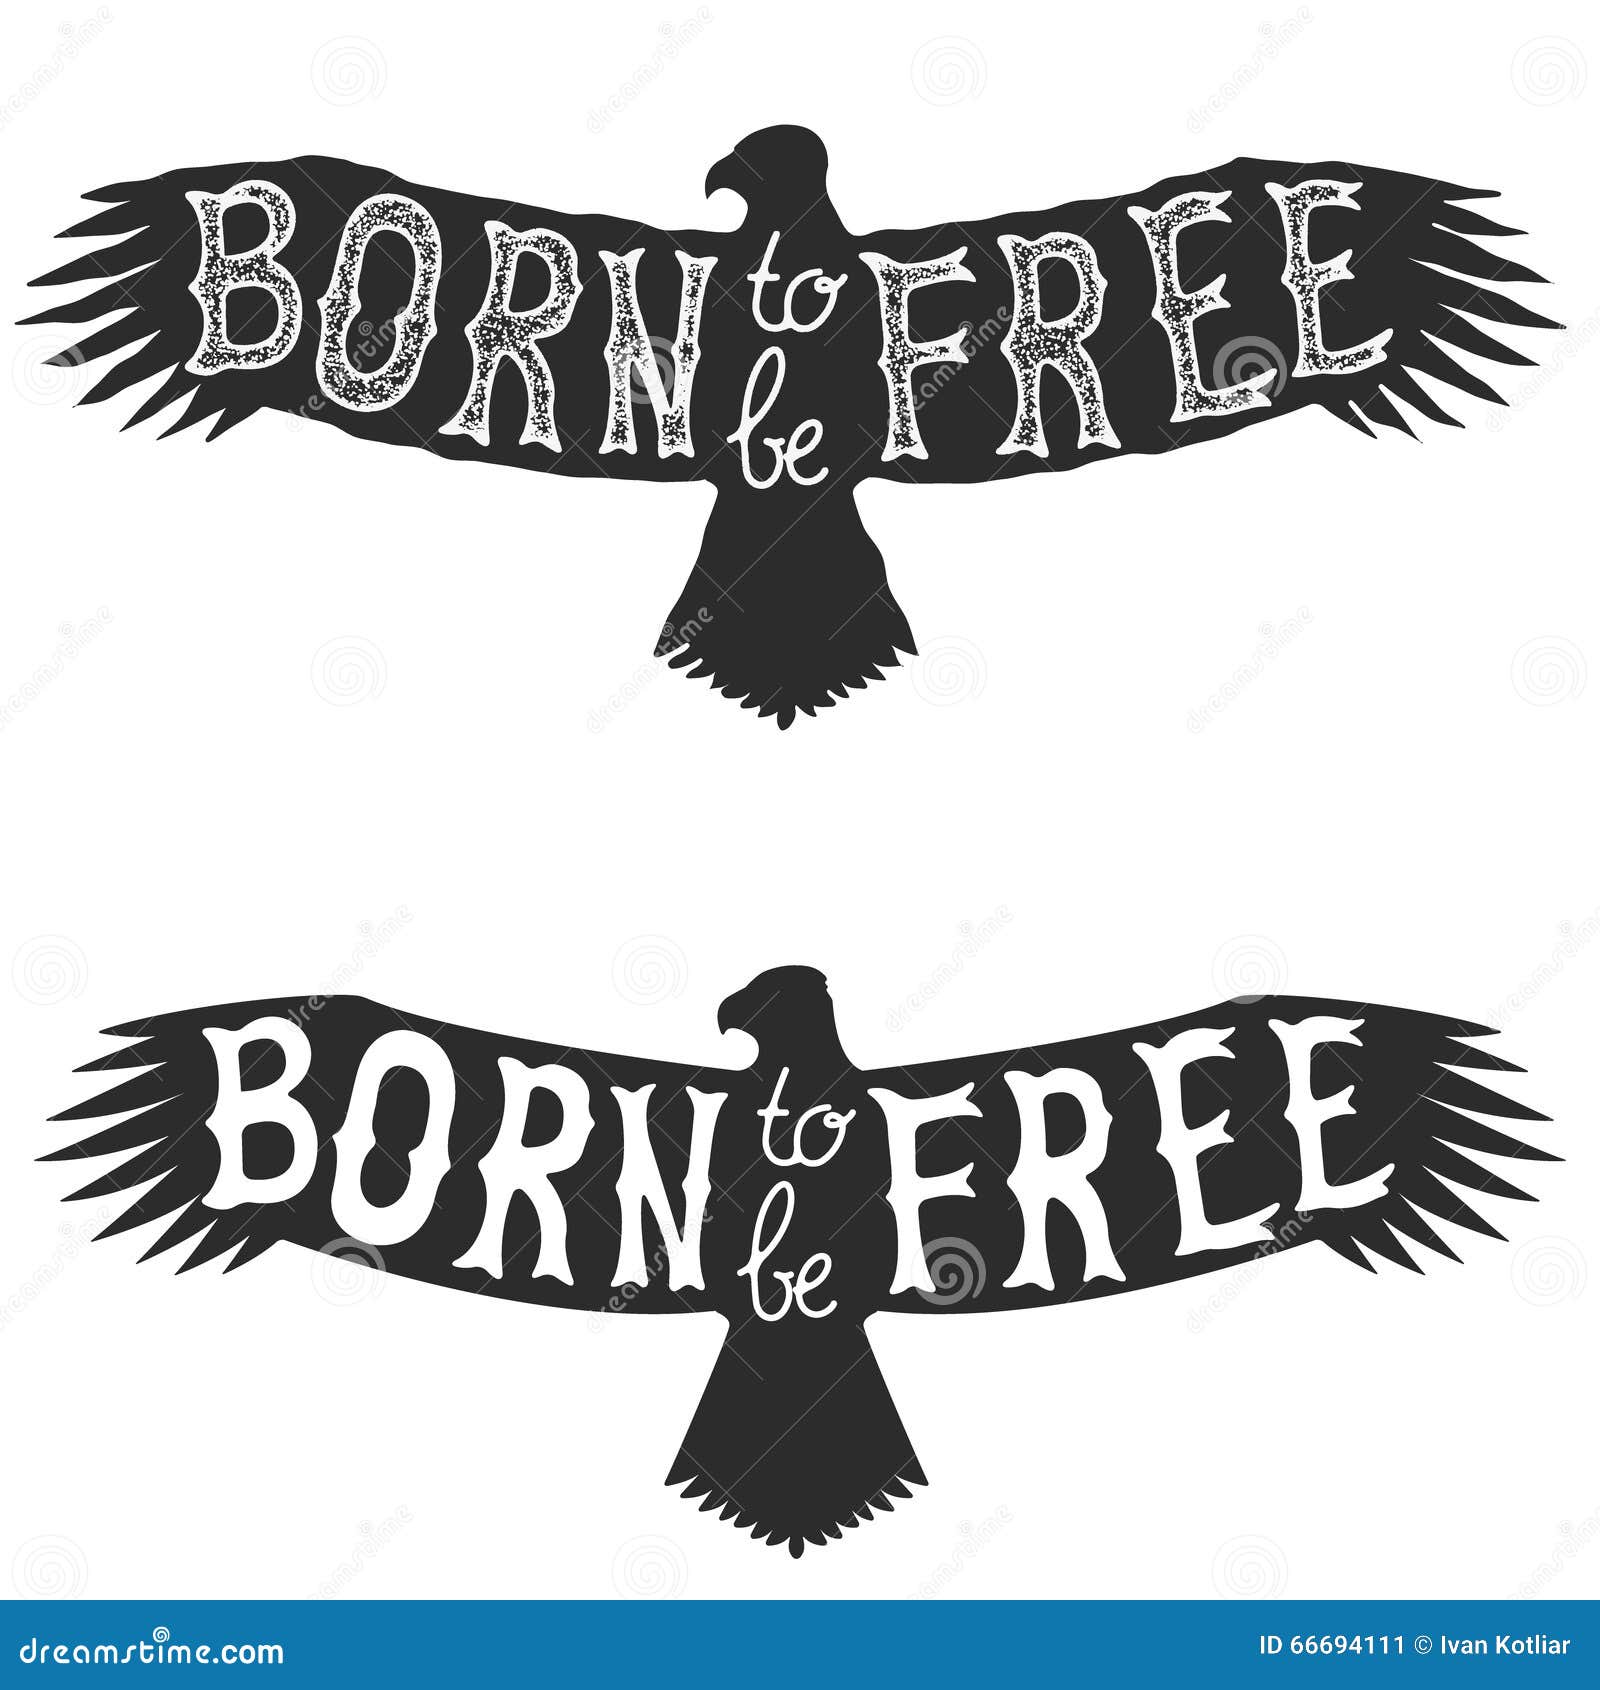 Born To Be Free. 